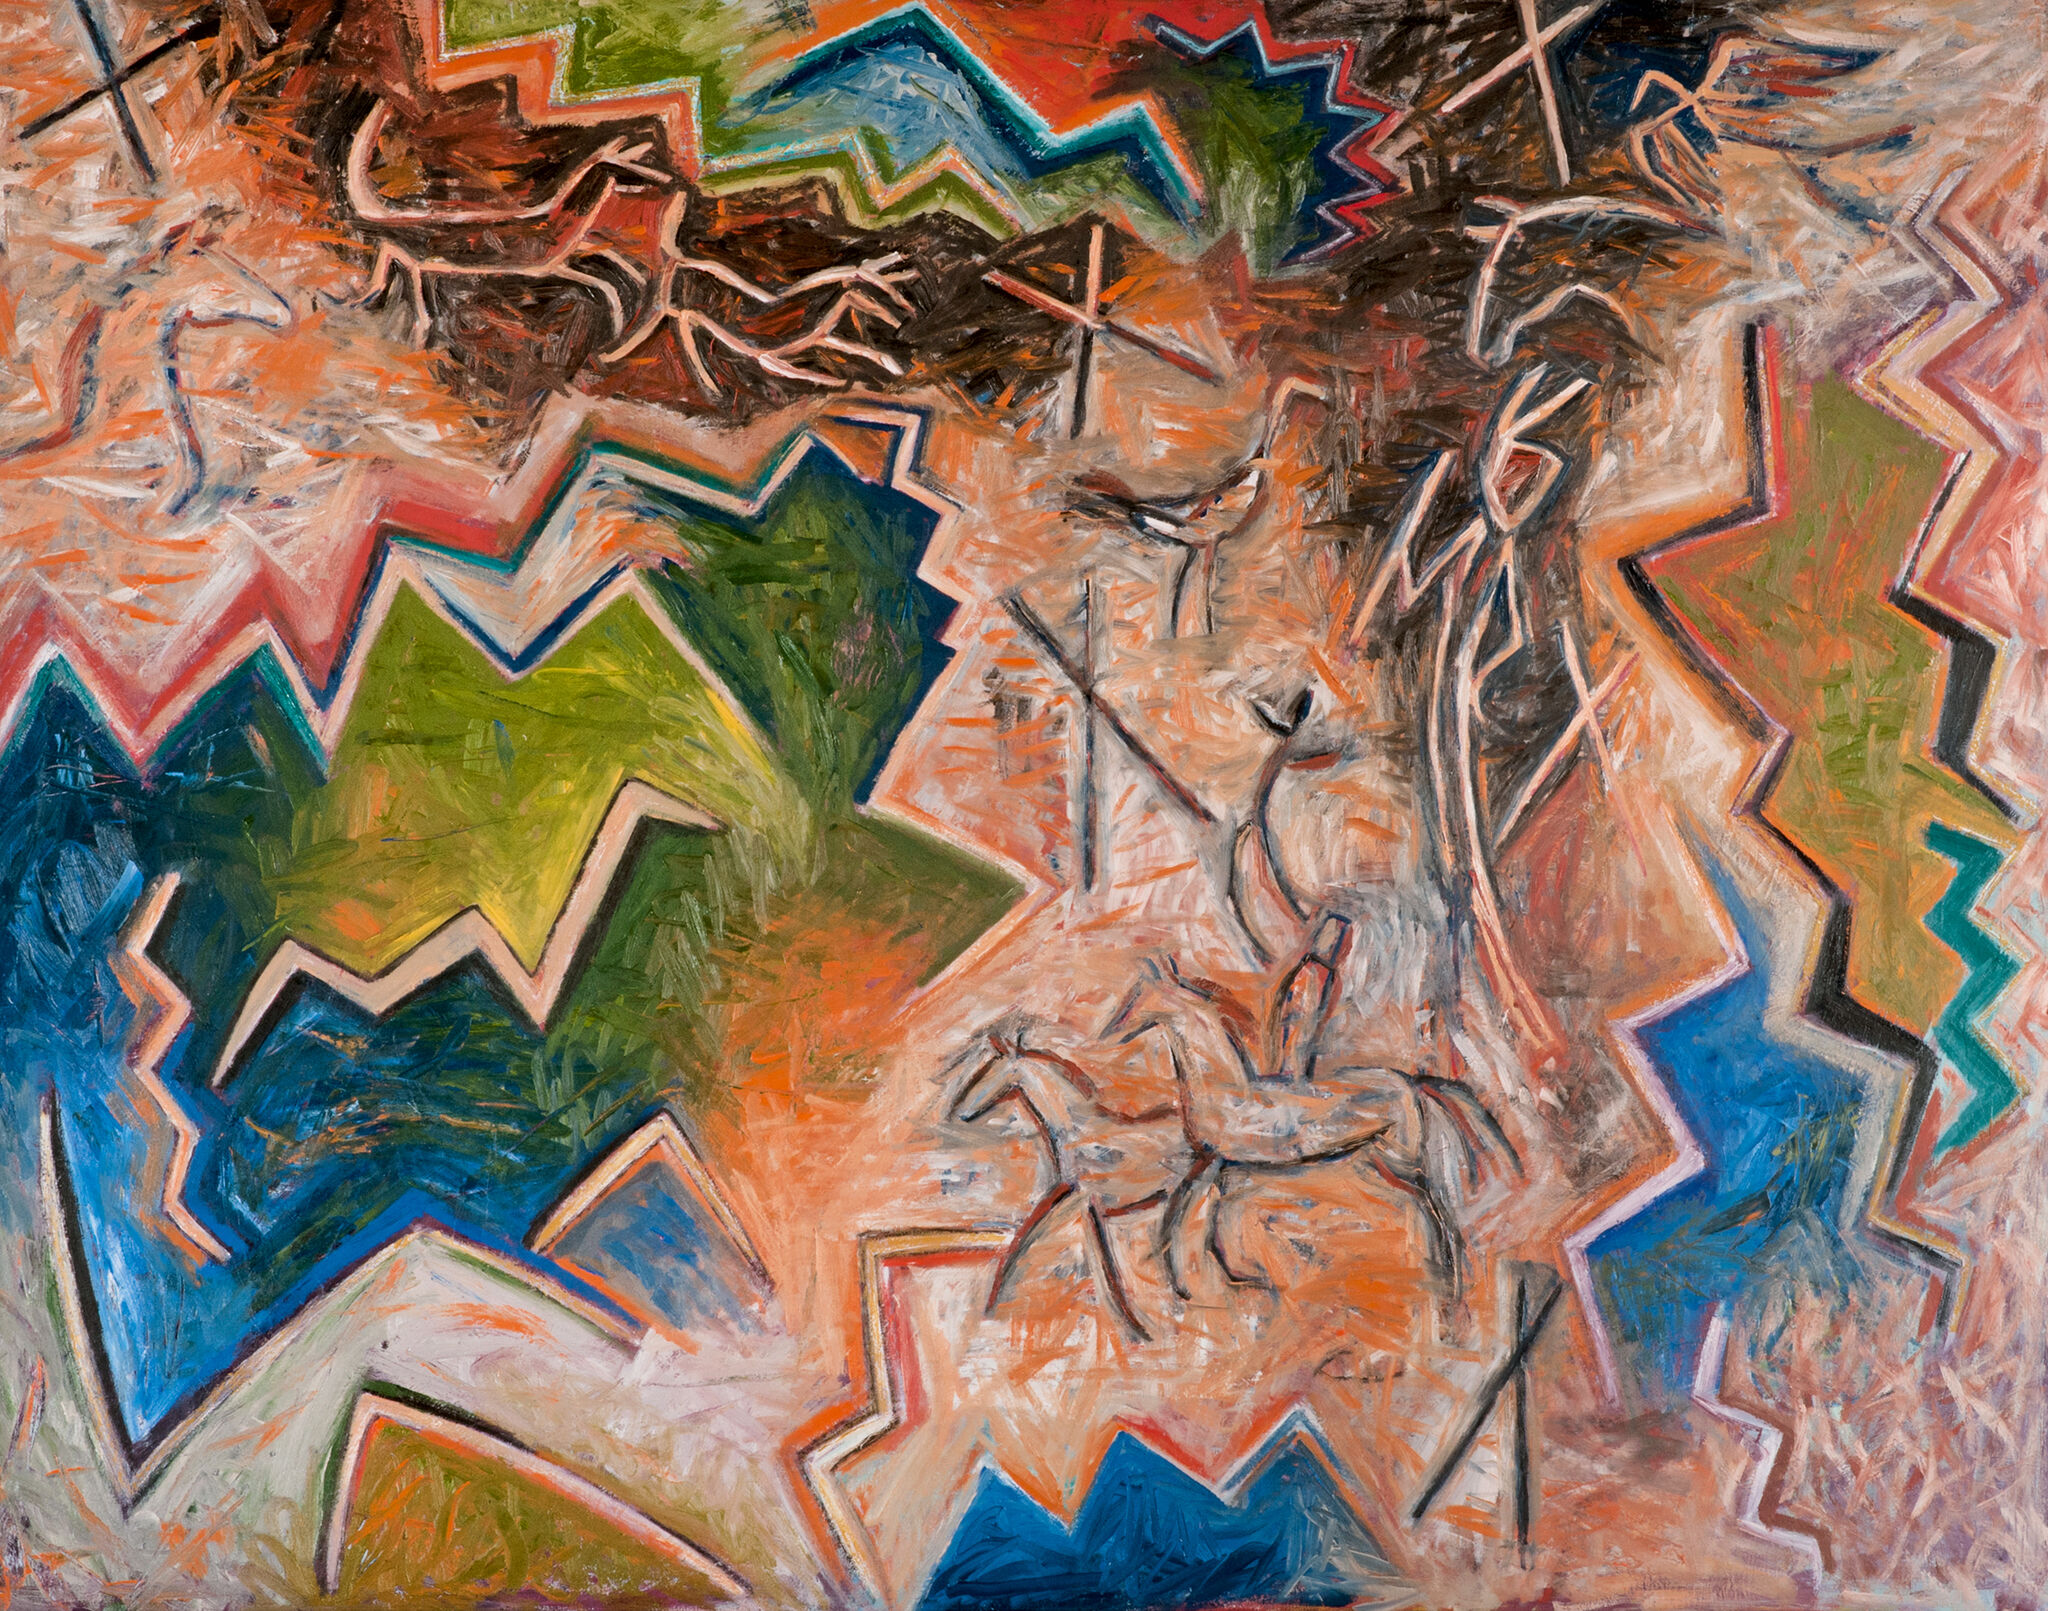 A canvas entirely covered in shapes, patterns, and saturated colors. Human and animal forms are visible amongst the highly pigmented color.